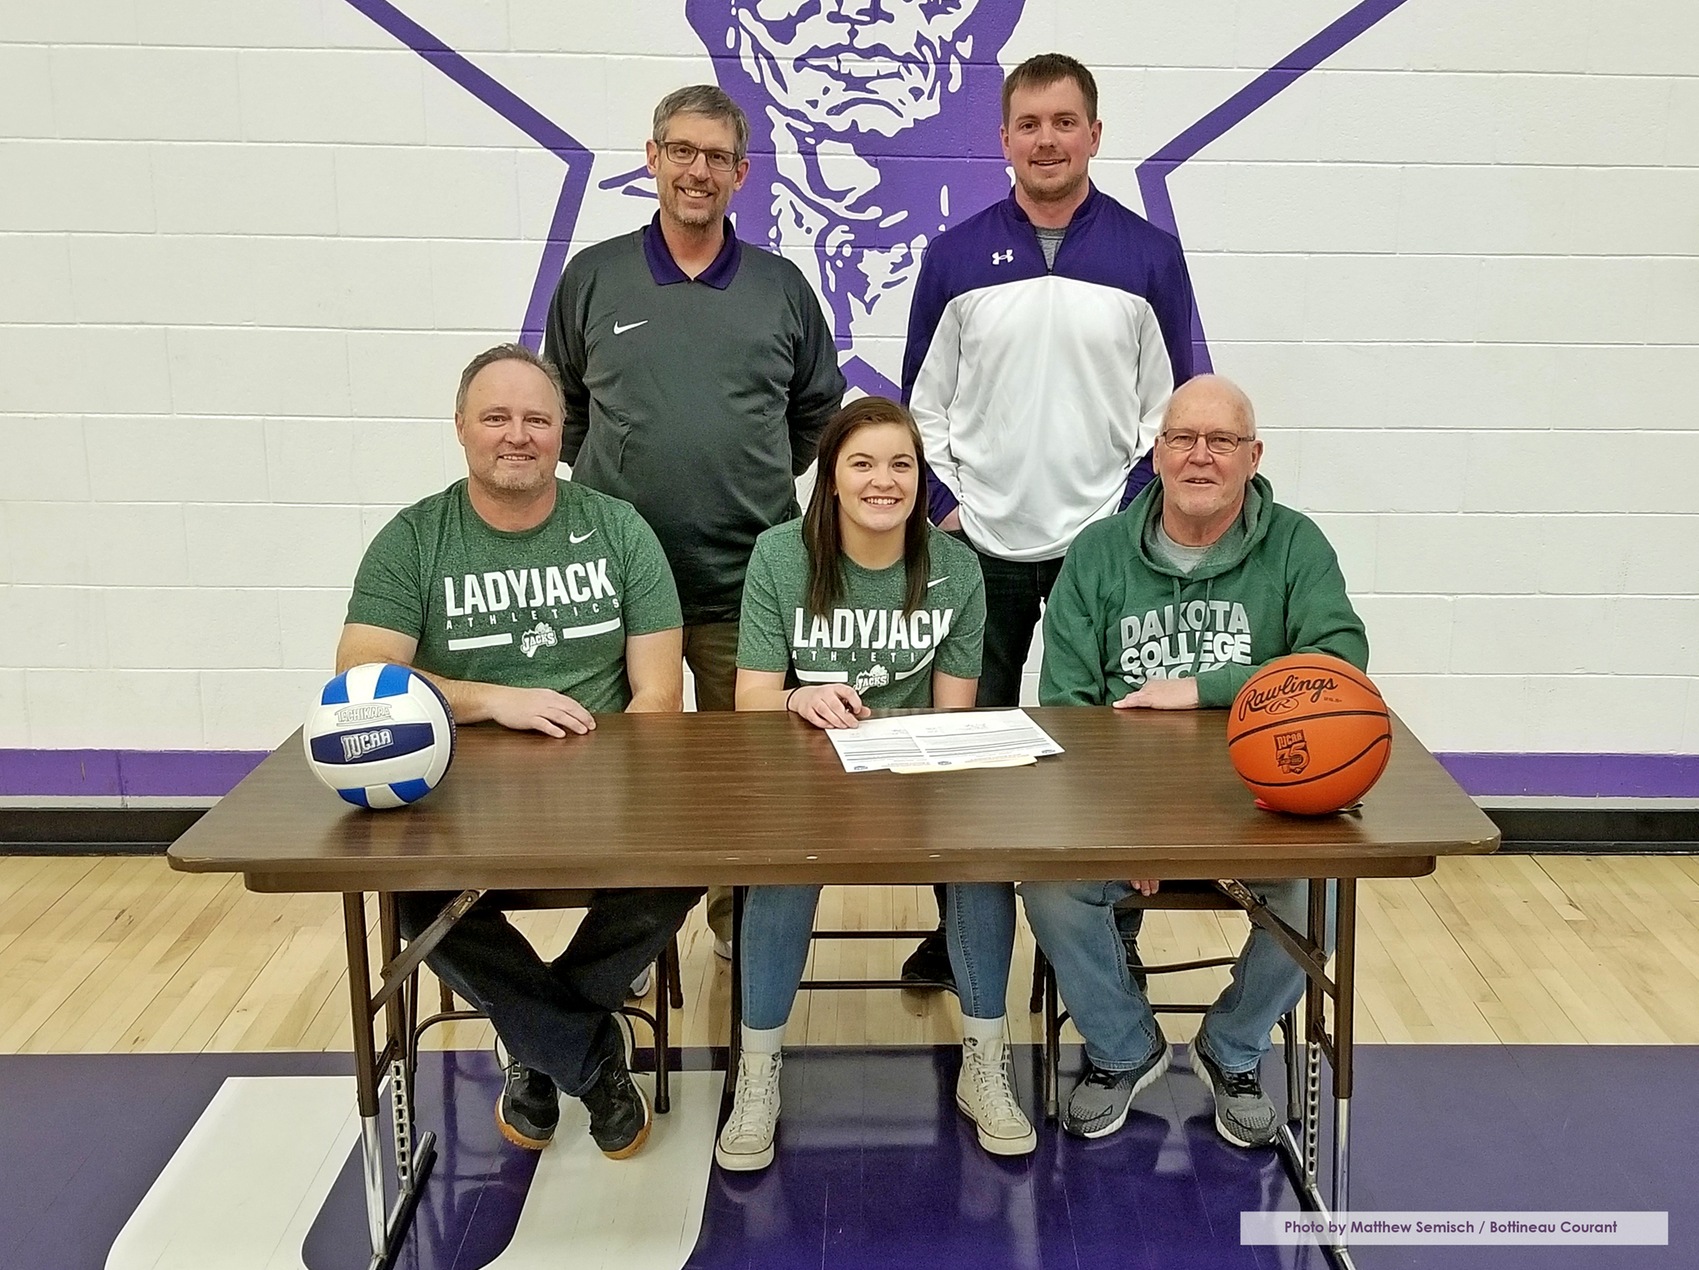 Local Bottineau High grad Toni Eide has signed on to play volleyball and basketball at DCB for the 2019-20 season.